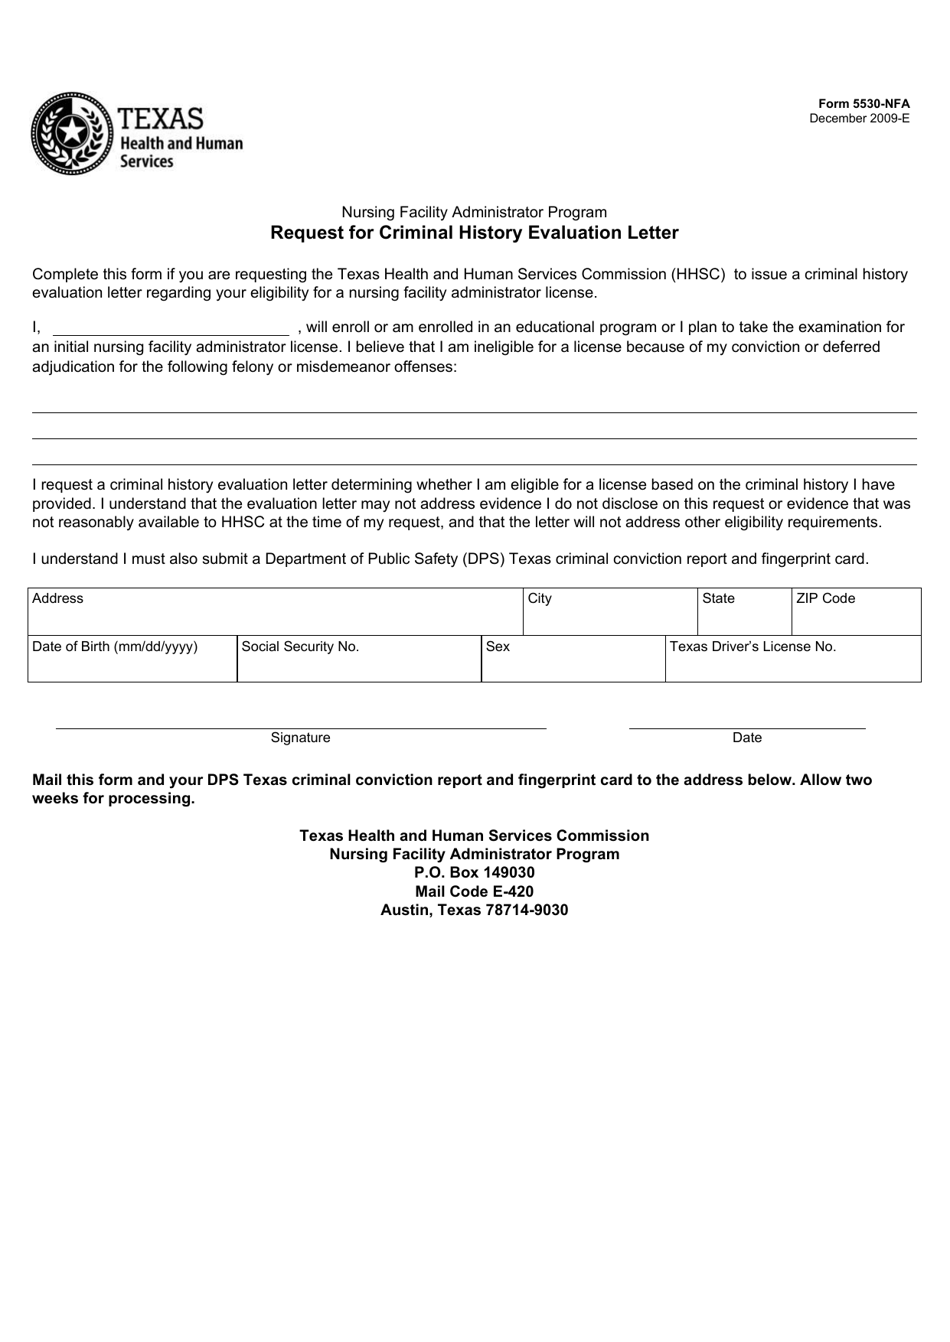 Form 5530-NFA Request for Criminal History Evaluation Letter - Texas, Page 1